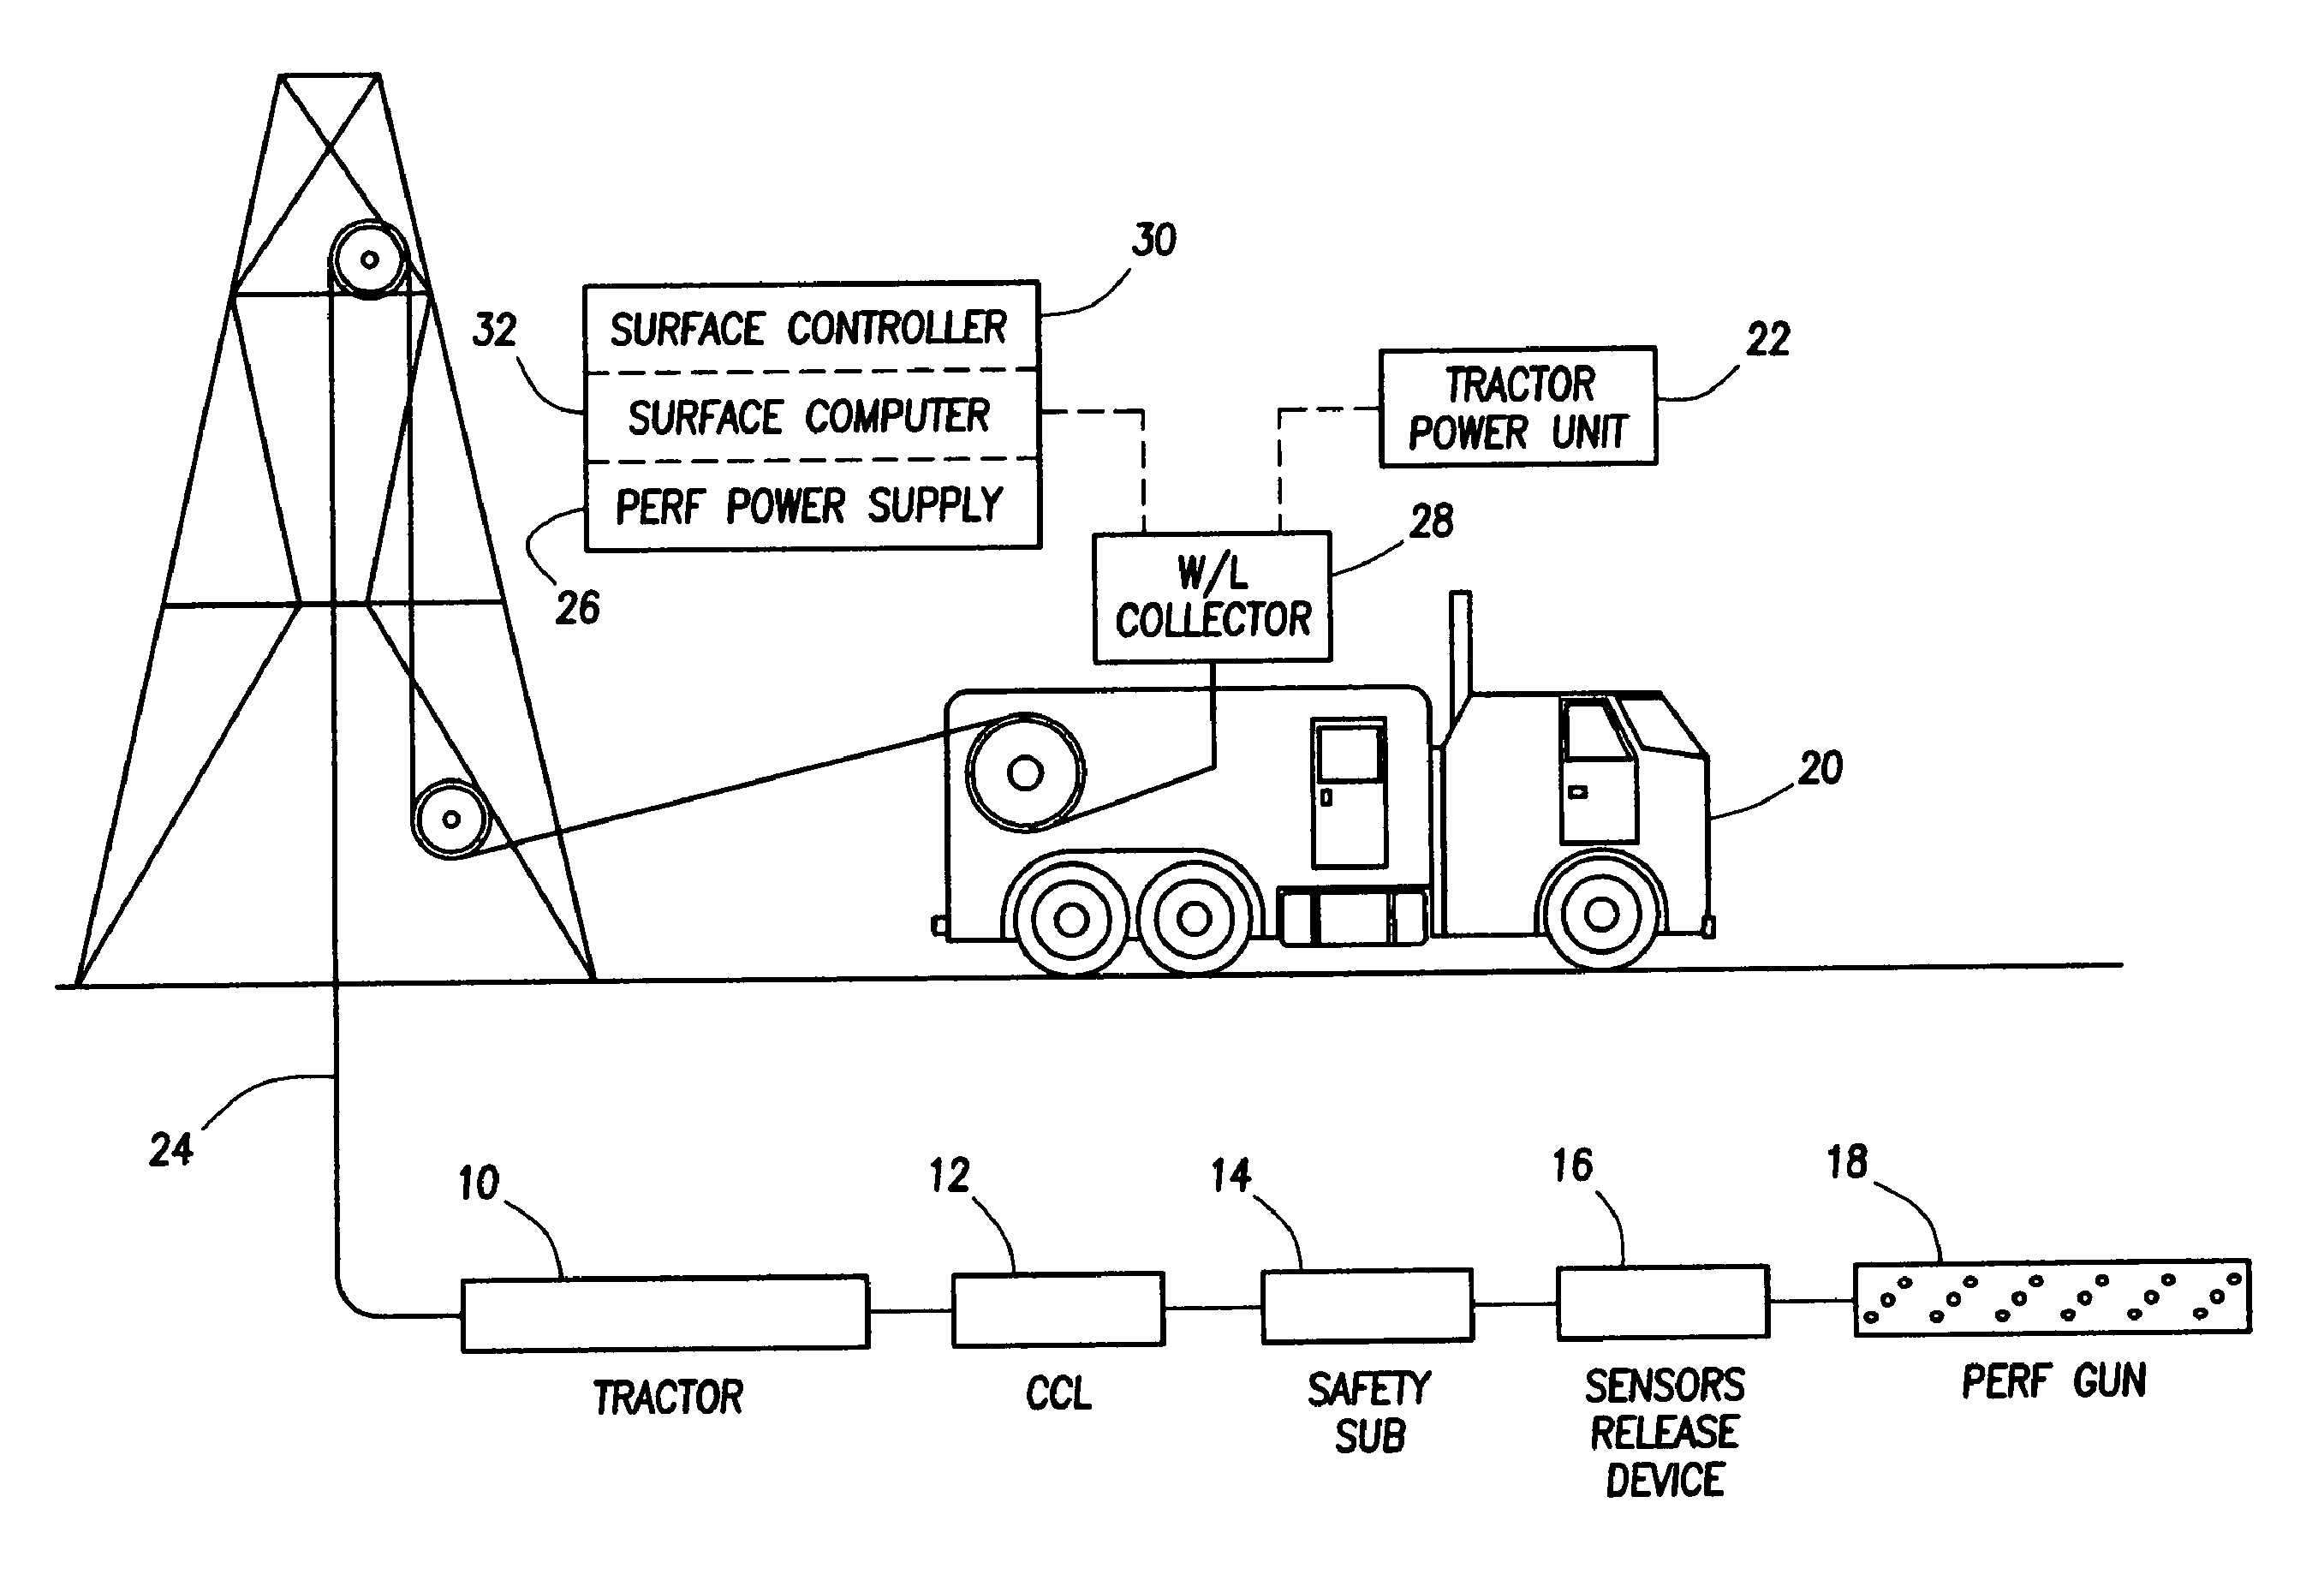 Apparatus and methods for controlling and communicating with downwhole devices